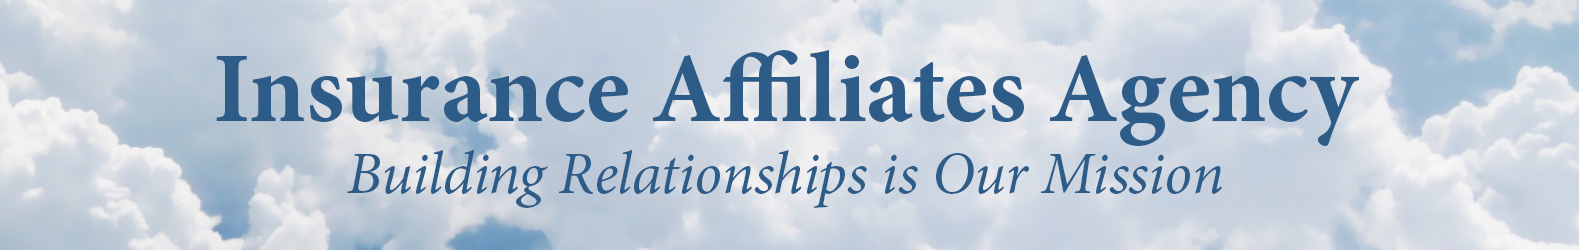 Insurance Affiliates Agency Building Relationships is Our Mission